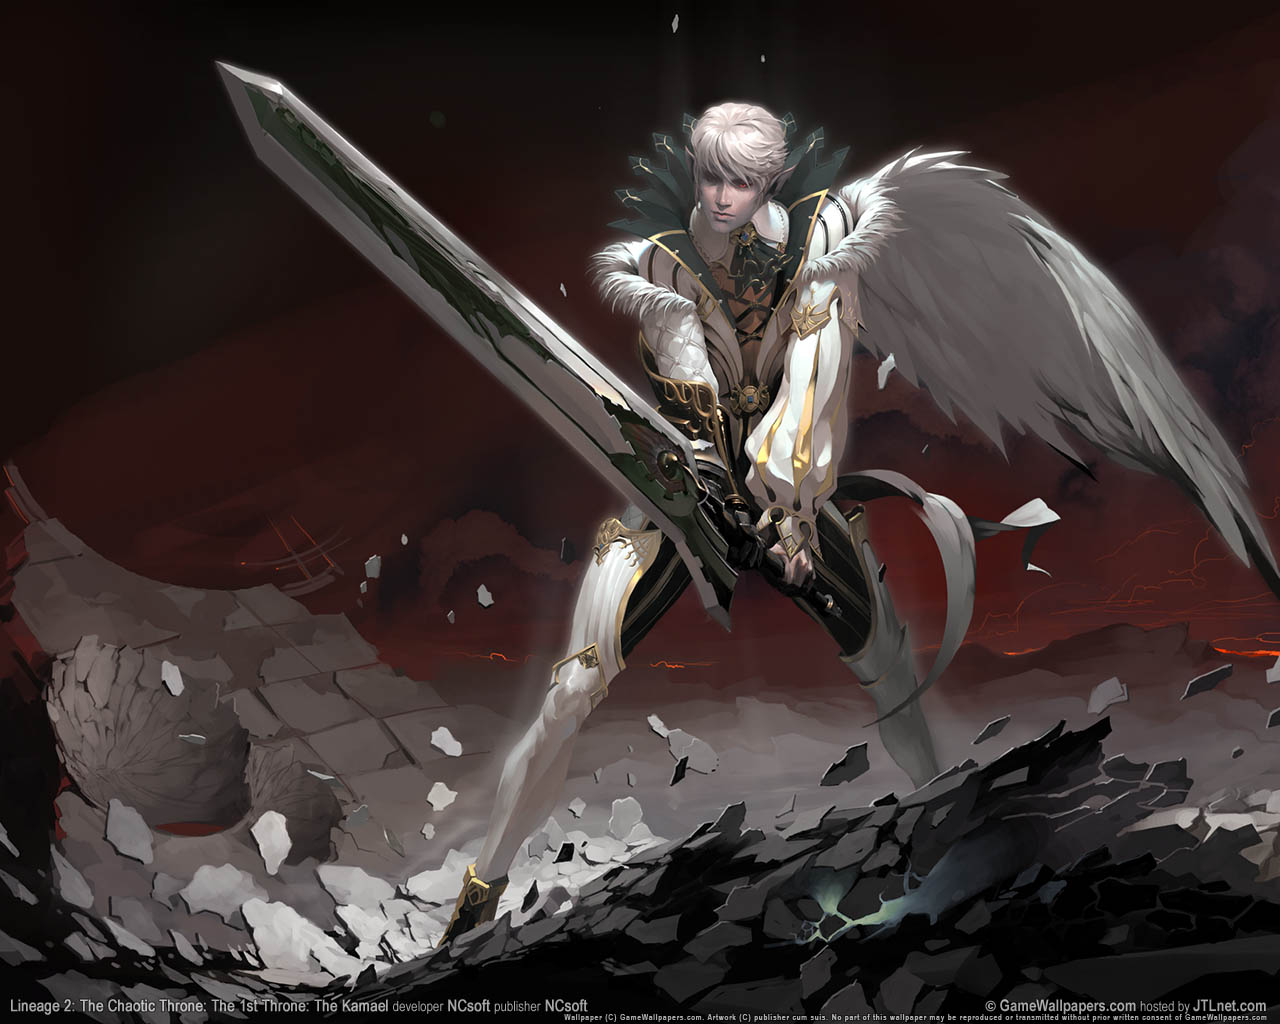 Lineage 2: The Chaotic Throne: The 1st Throne: The Kamael wallpaper 01 1280x1024